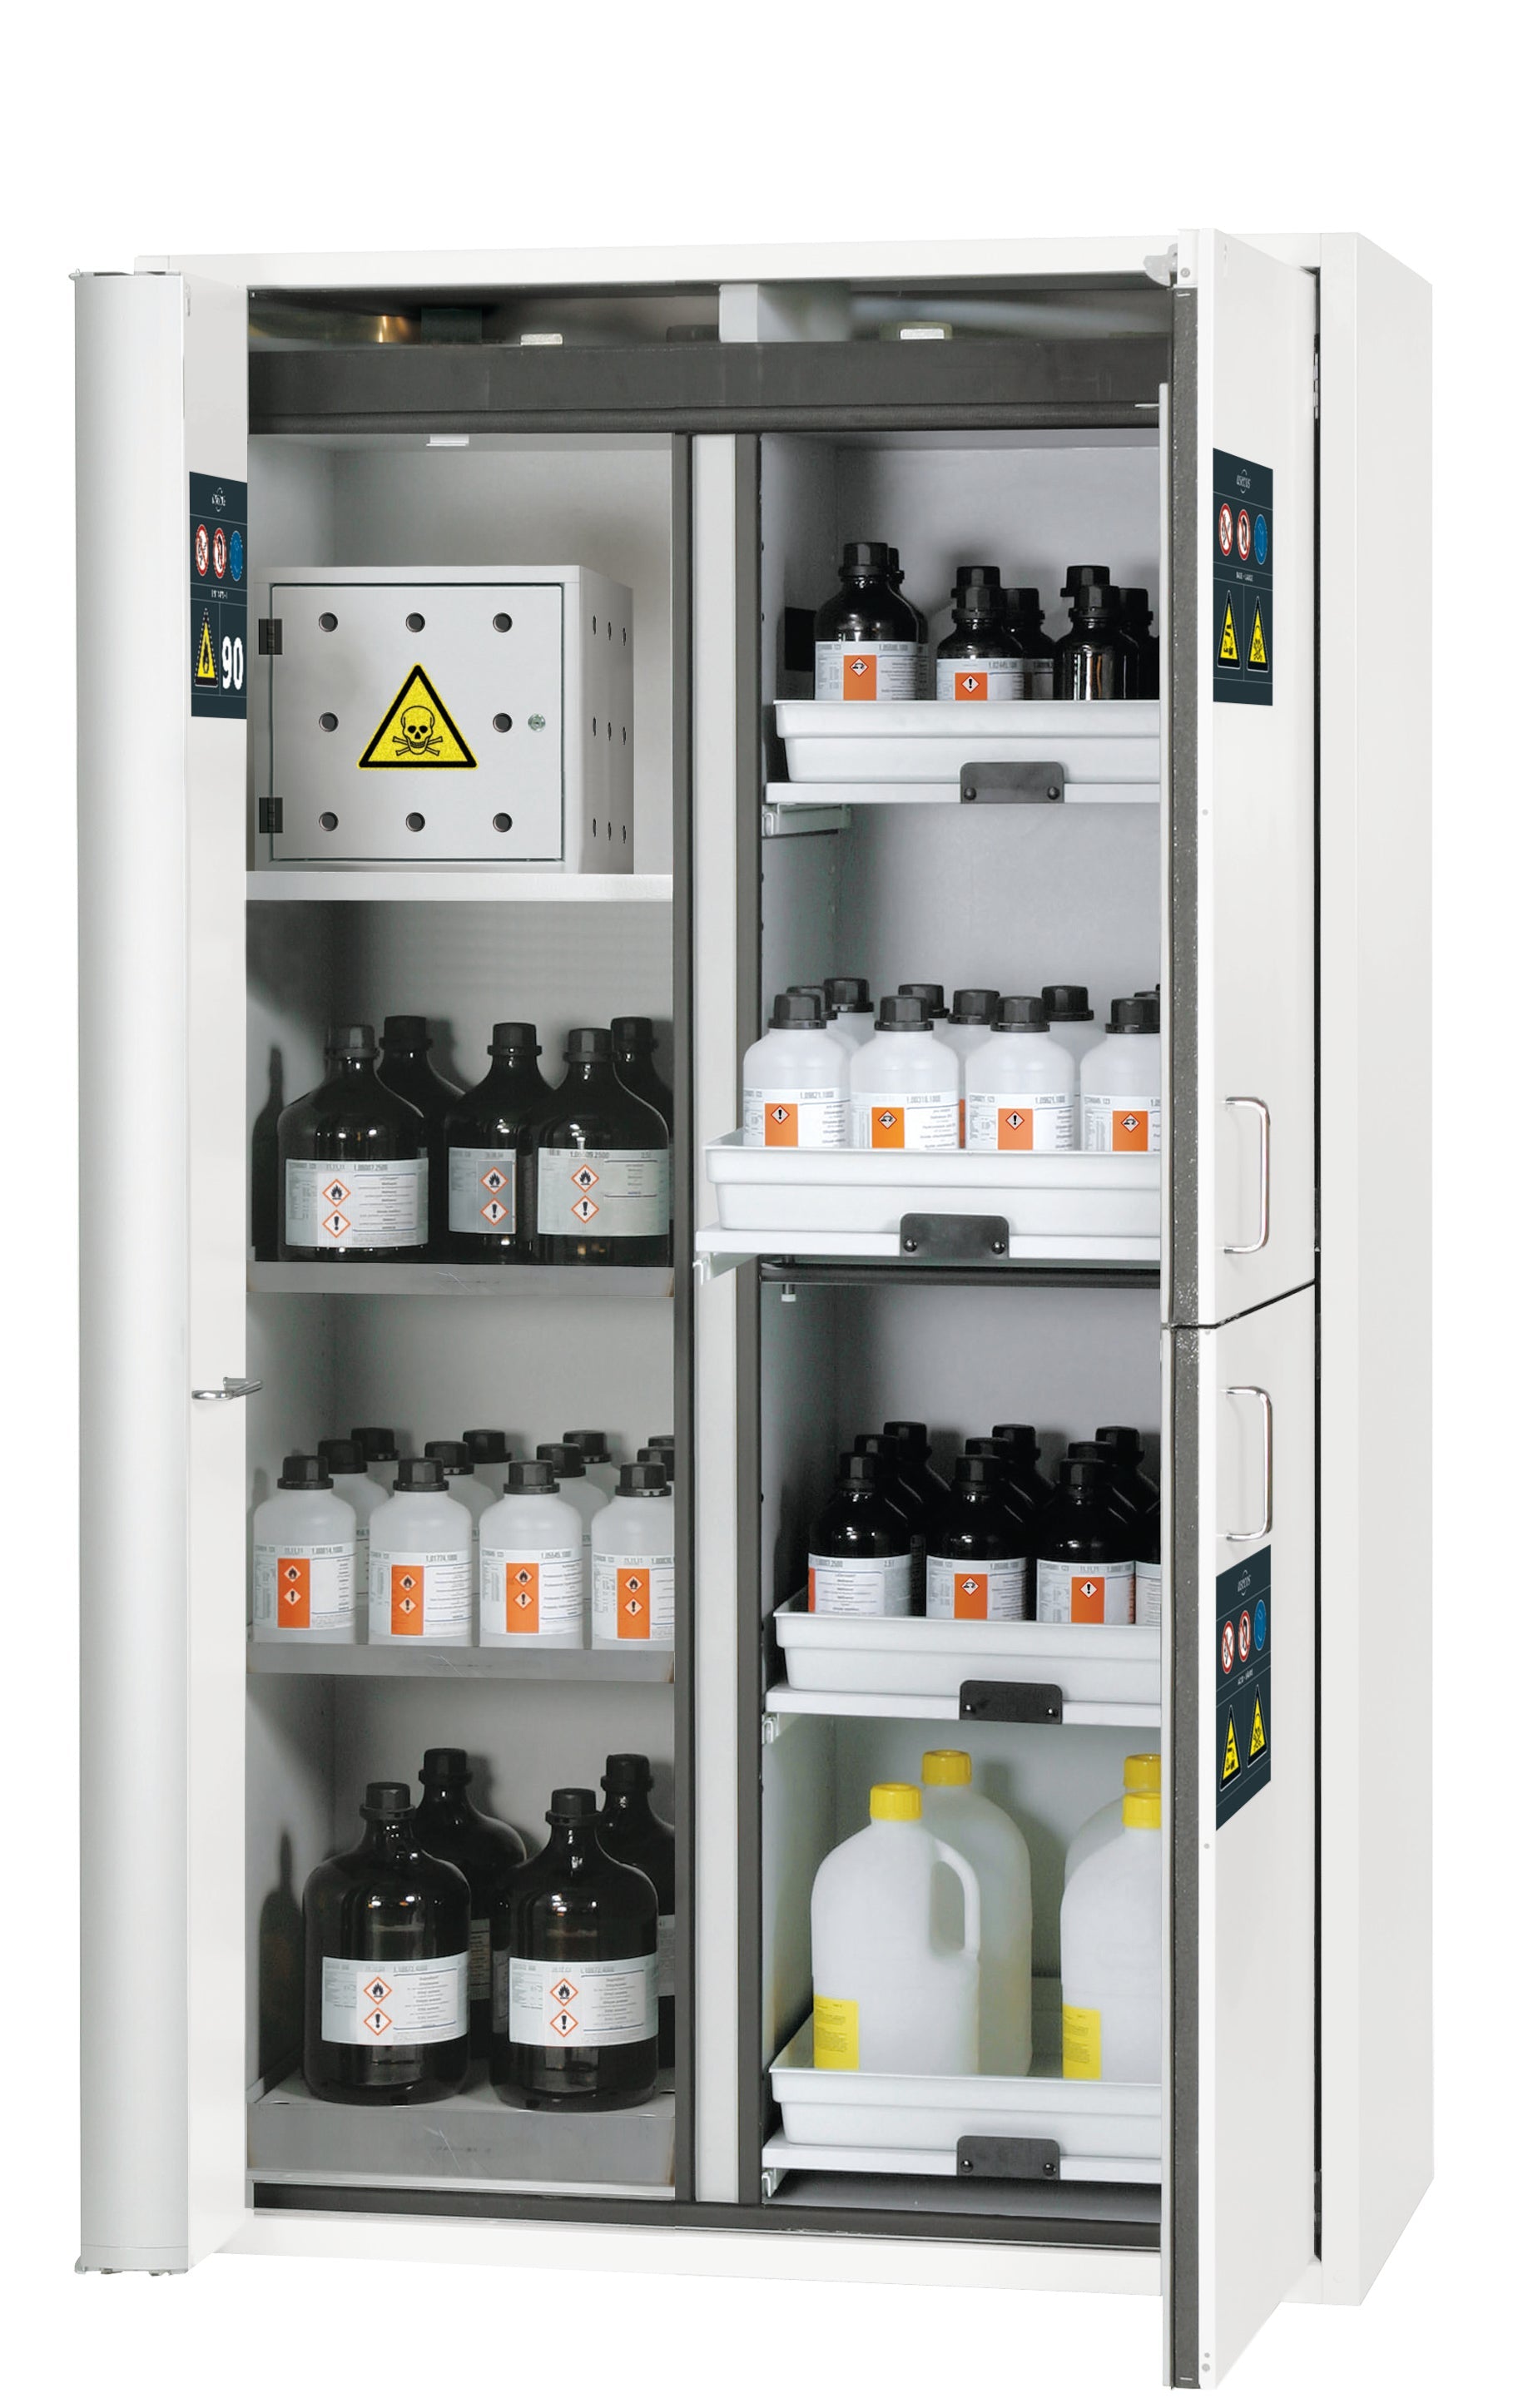 Type 90 combination safety cabinet K-PHOENIX Vol.2-90 model K90.196.120.MC.FWAC in laboratory white (similar to RAL 9016) with 2x standard shelves (stainless steel 1.4301)